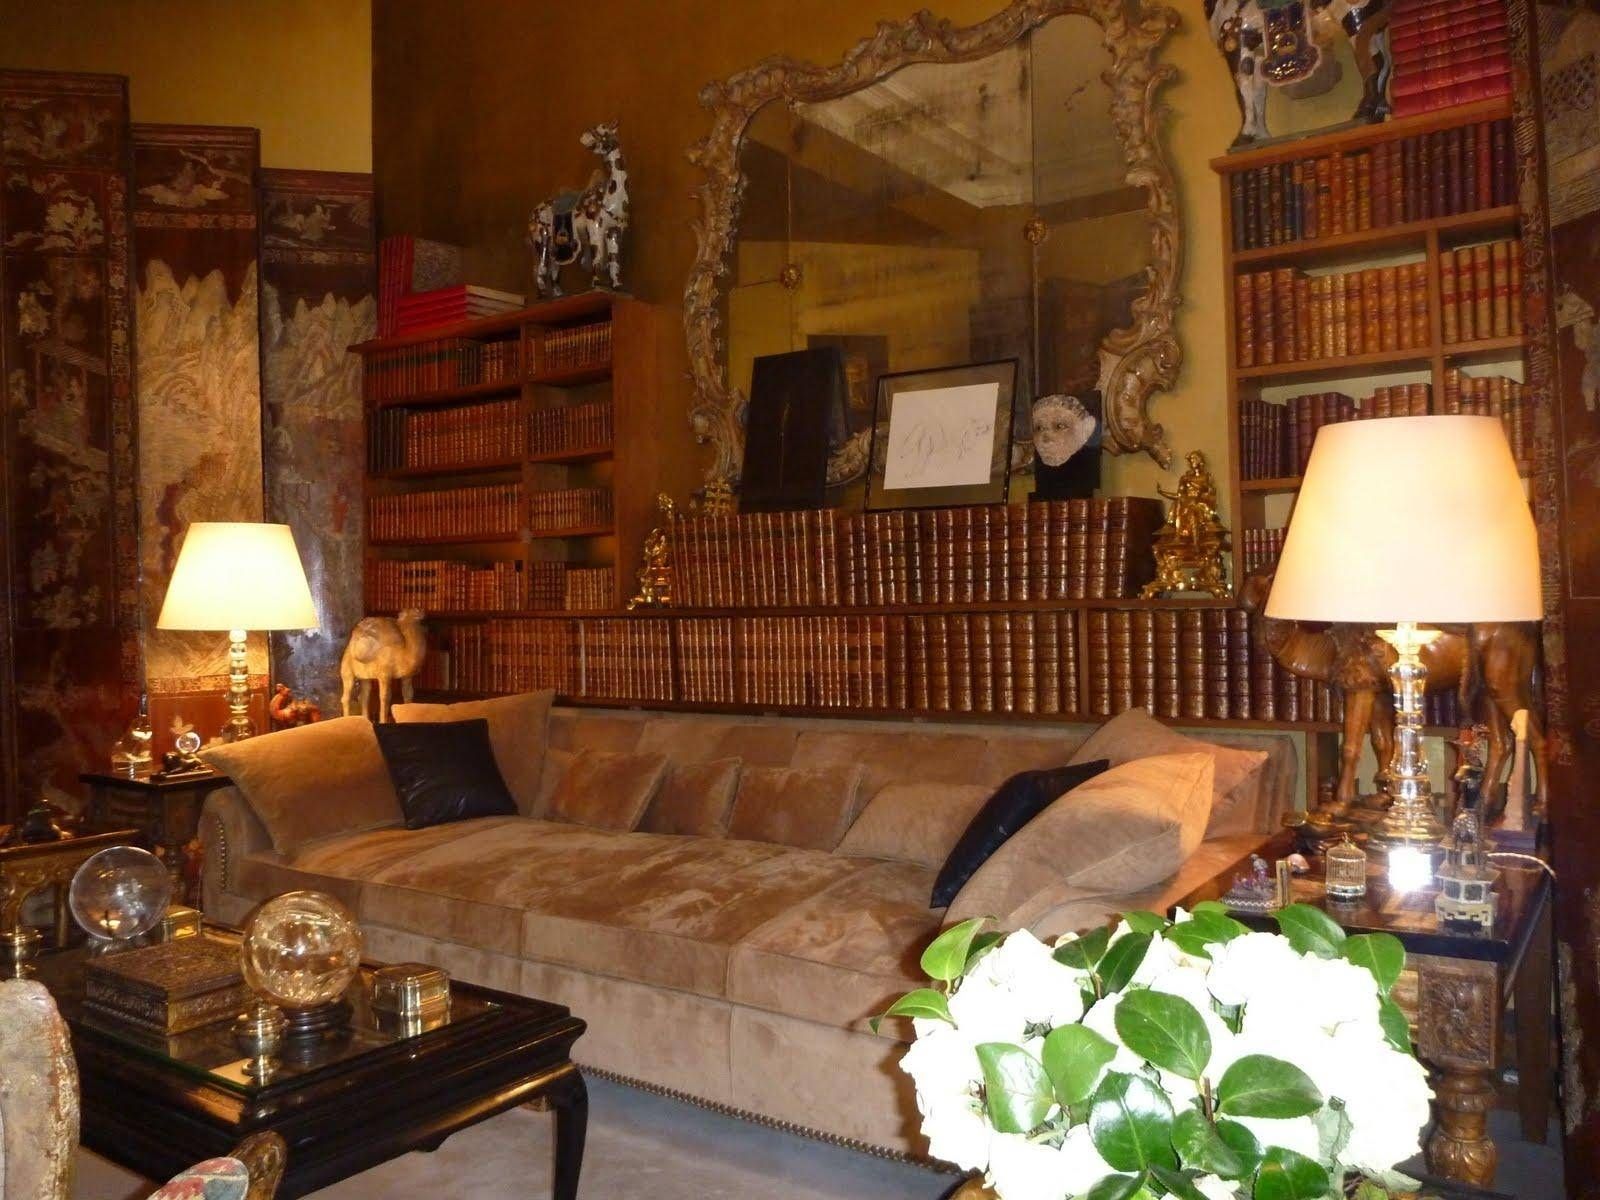 20 Best Collection Of Coco Chanel Sofas | Sofa Ideas In Coco Chanel Sofas (View 10 of 15)